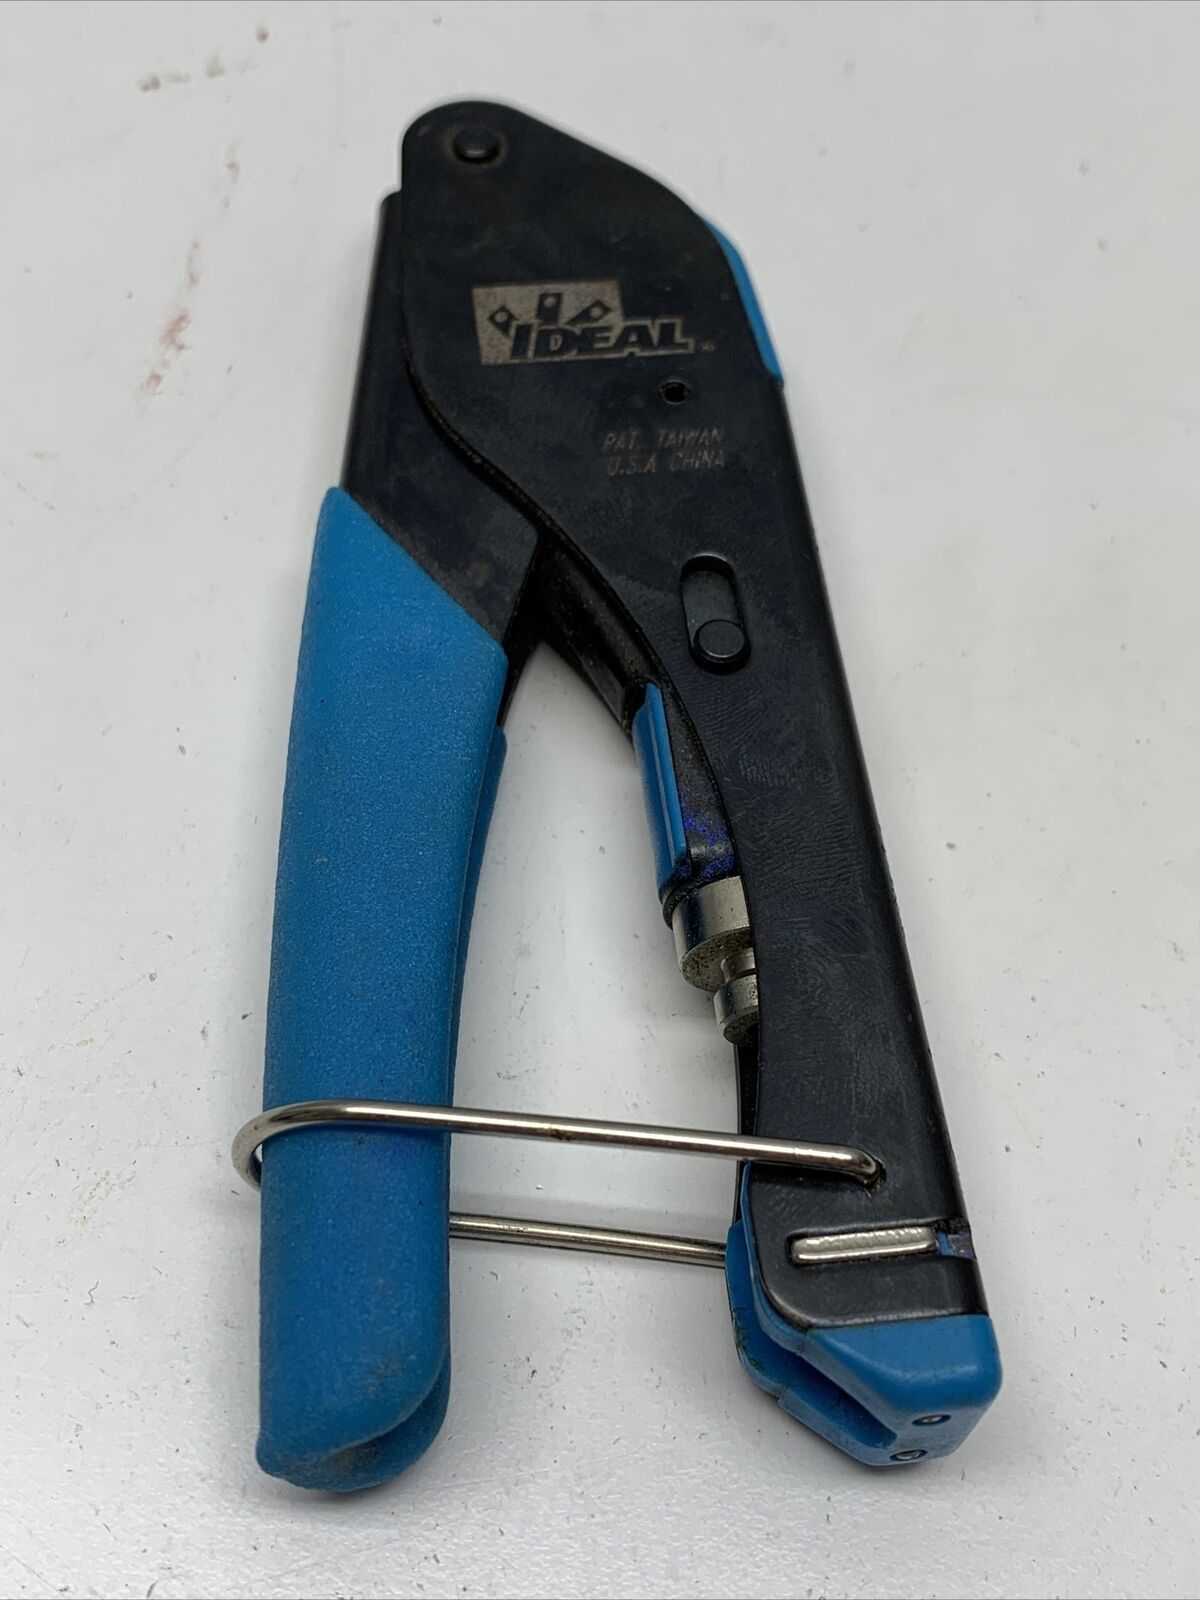 Ideal linear compression crimping tool KG - $24.75